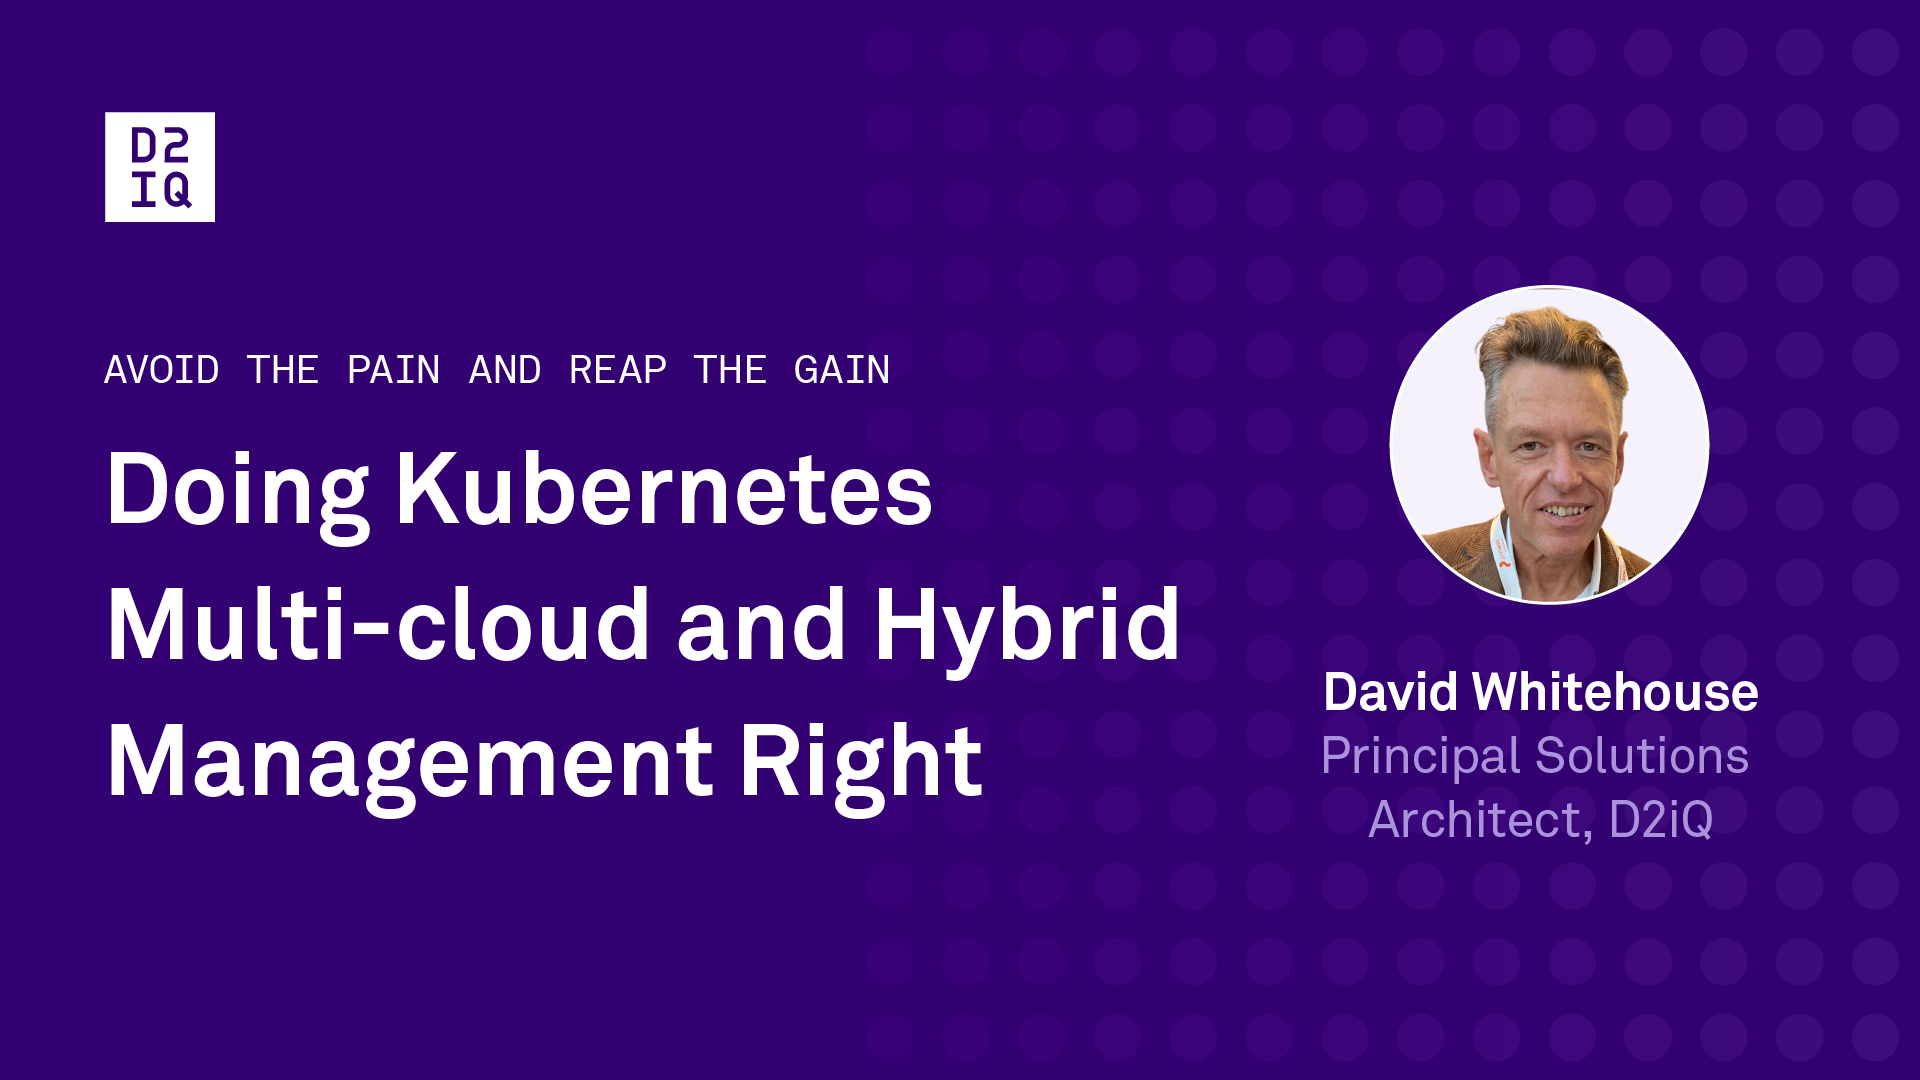 Doing Kubernetes Multi-cloud and Hybrid Management Right